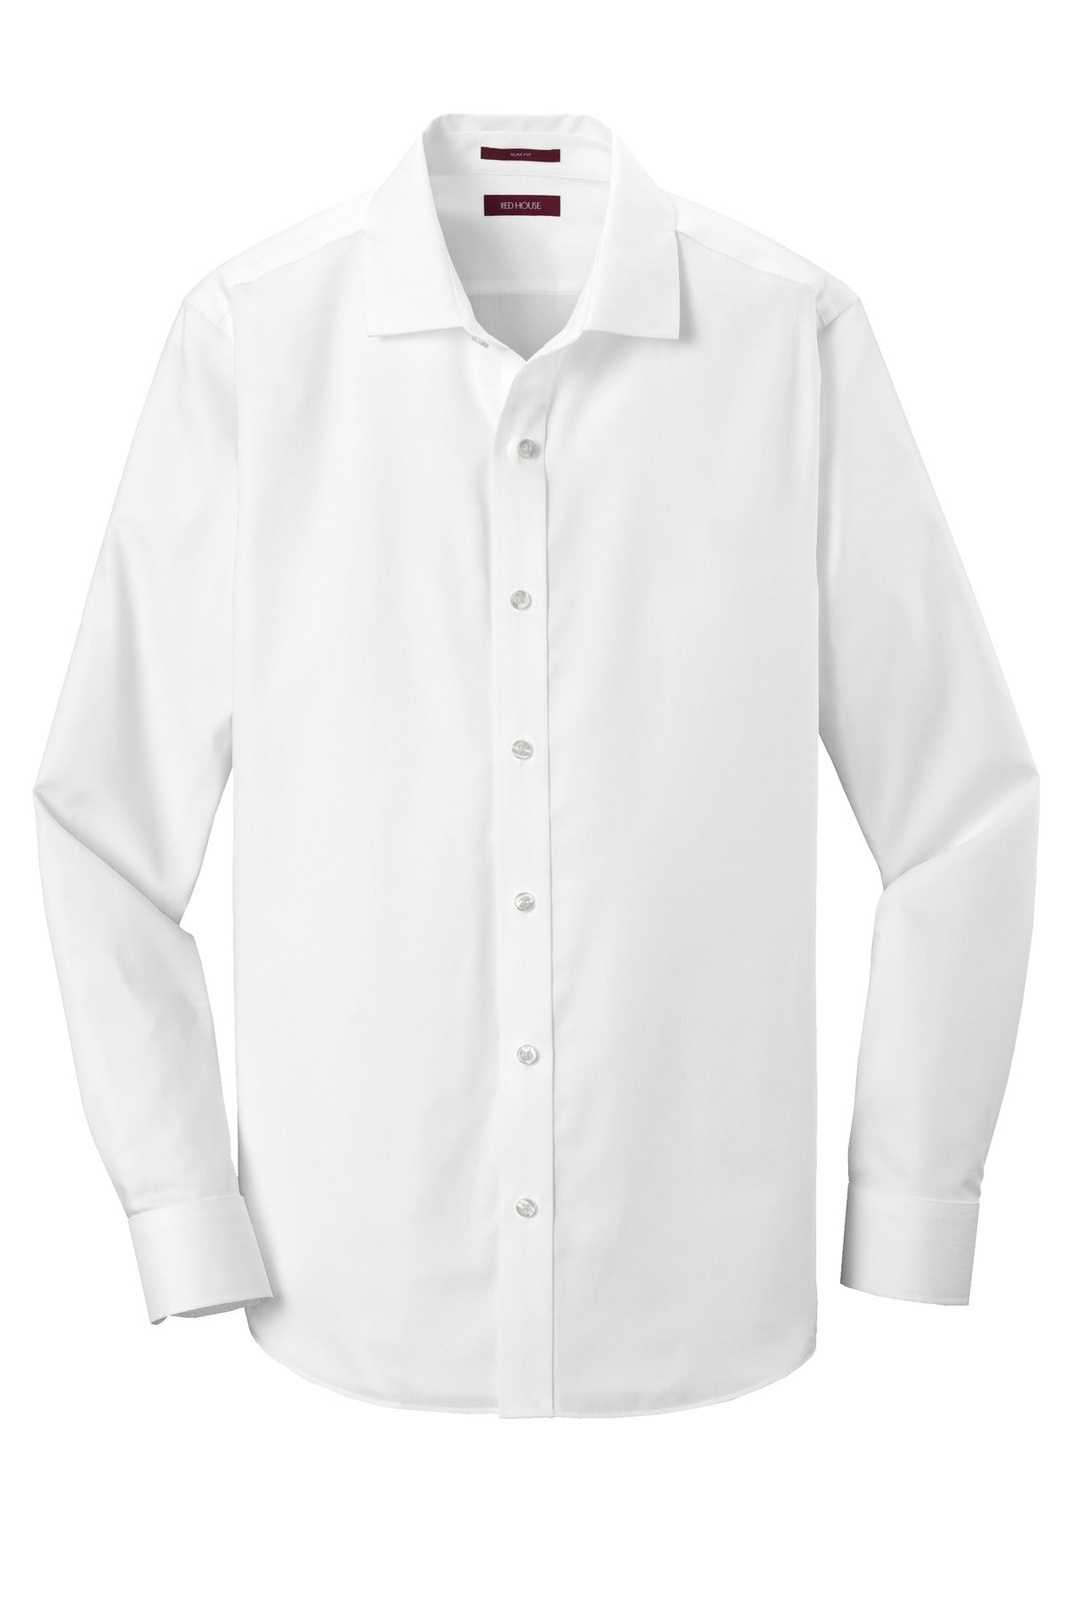 Red House RH620 Slim Fit Pinpoint Oxford Non-Iron Shirt - White - HIT a Double - 5